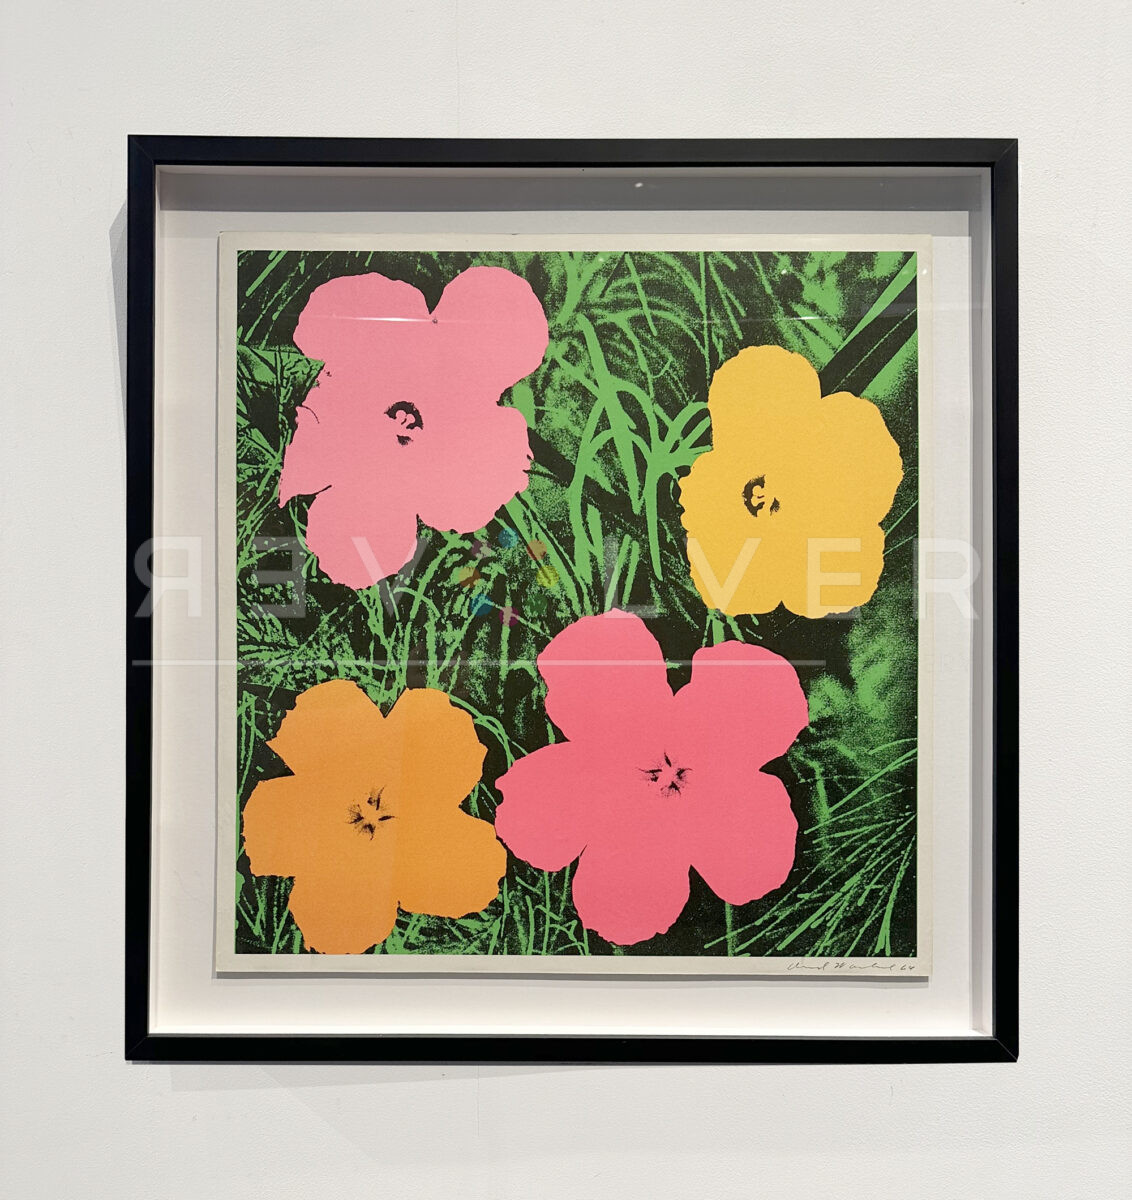 Flowers 6 by Andy Warhol